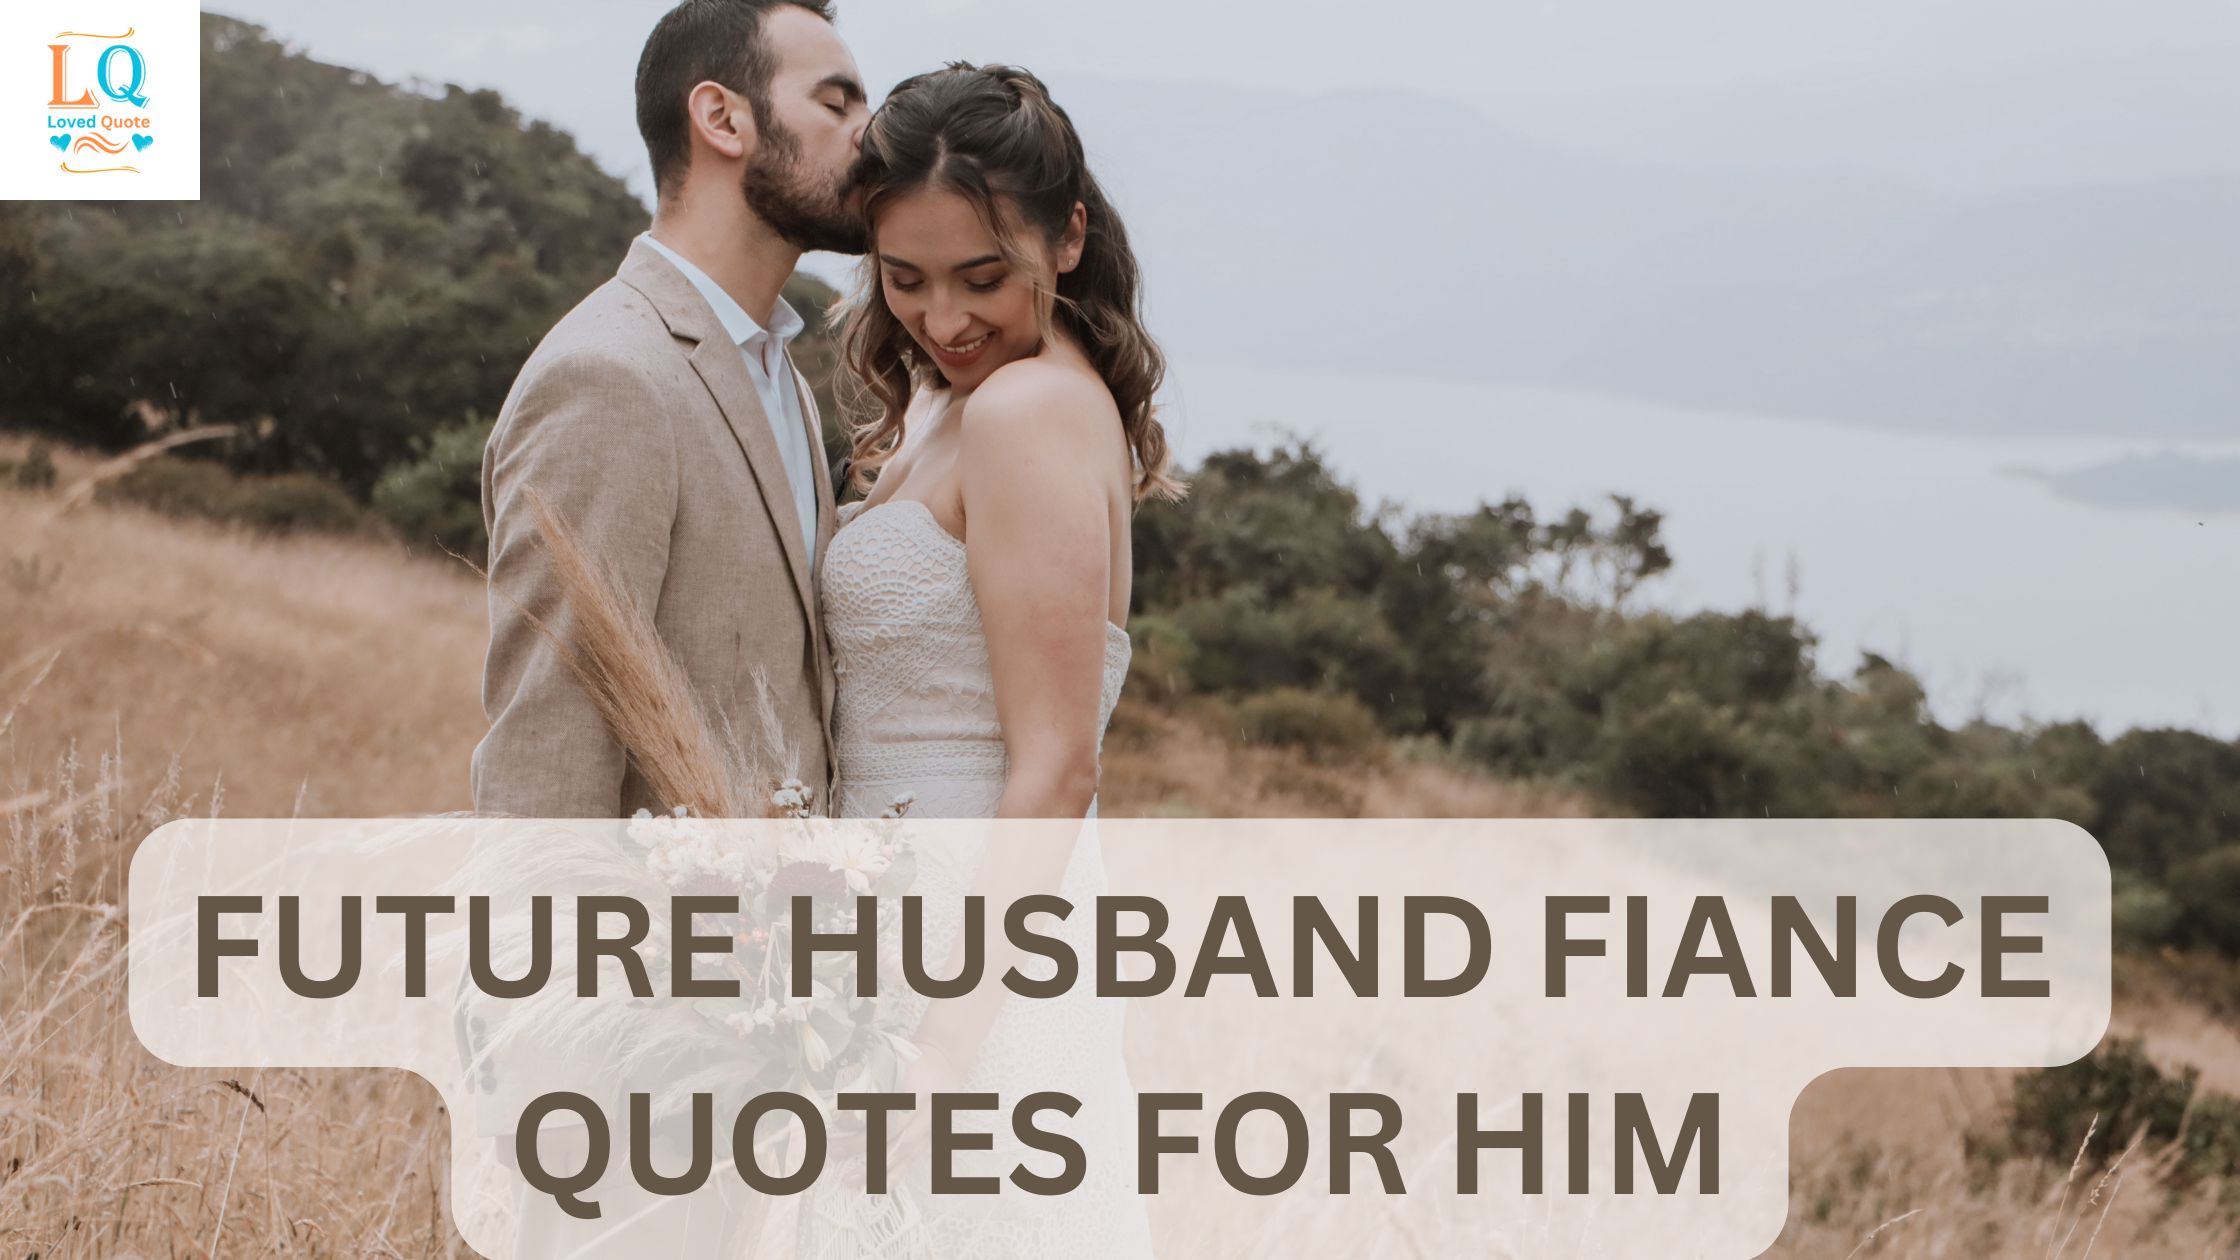 Future Husband Fiance Quotes for Him - #1 Best Complete Guide